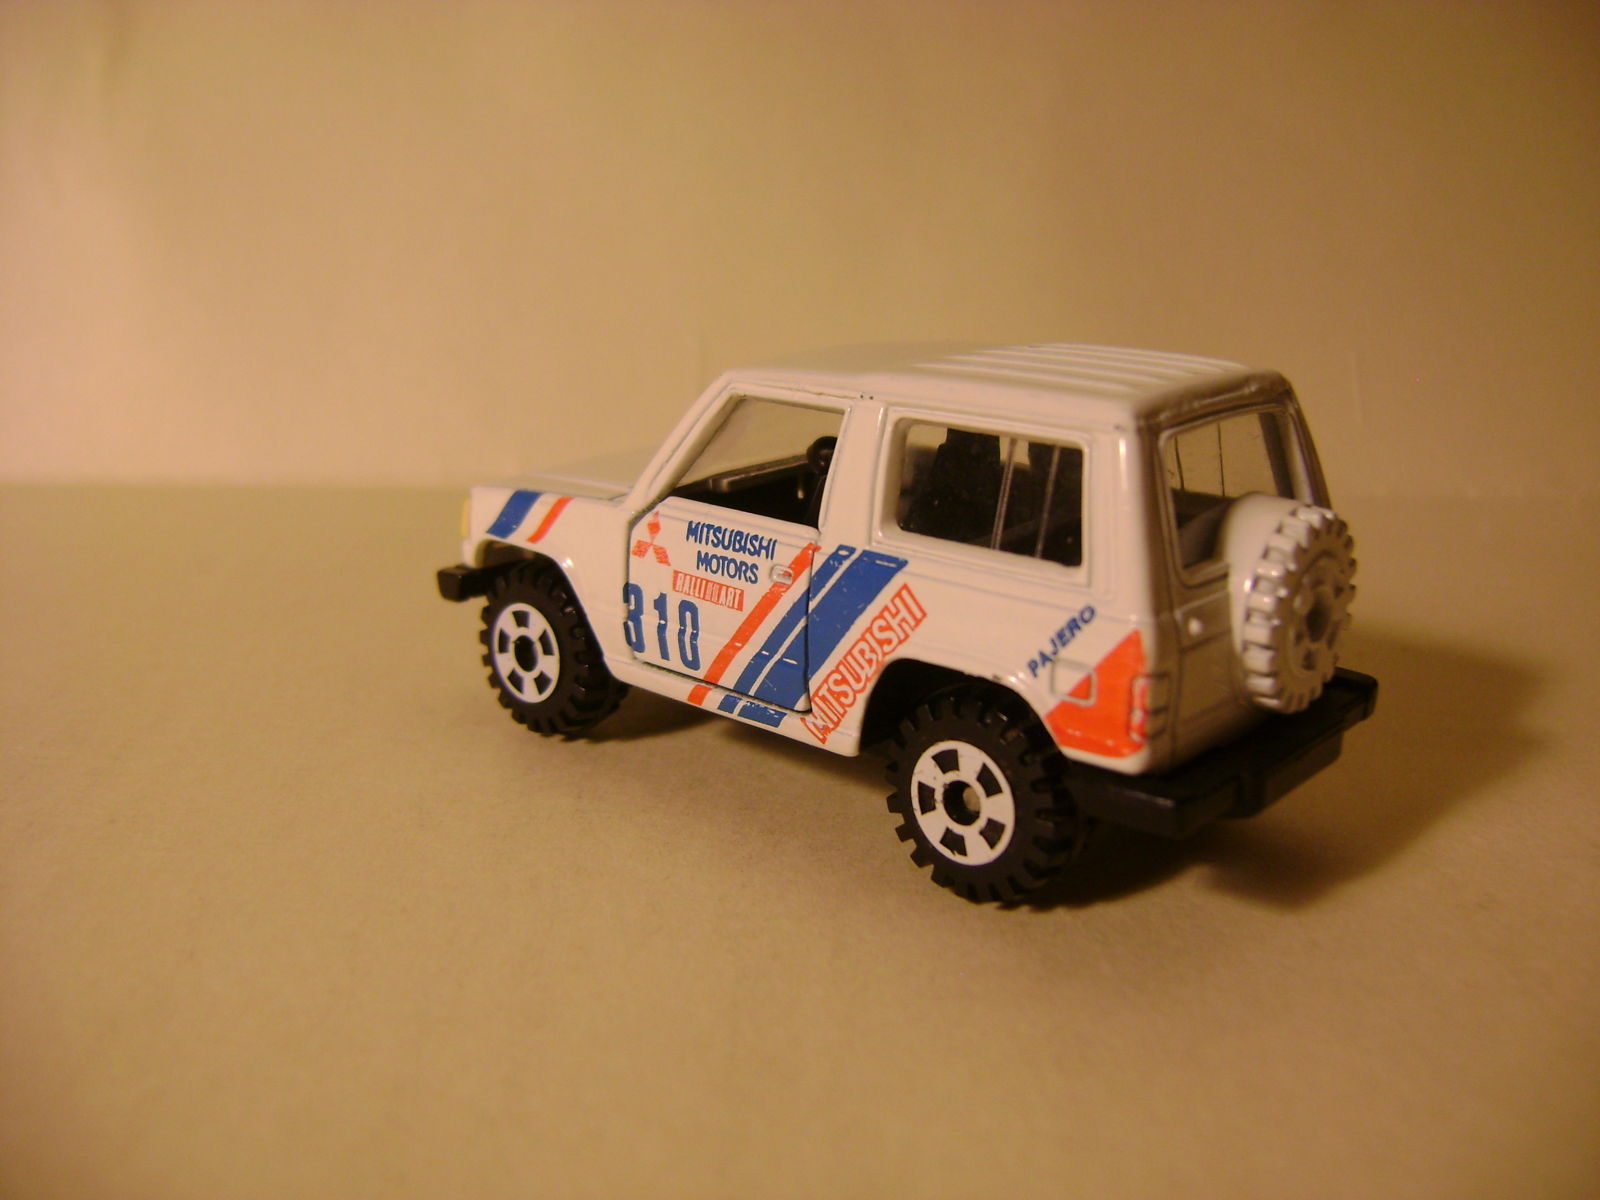 Illustration for article titled Restoration Project - Tomica Mitsubishi Pajero Rally (Part 1)